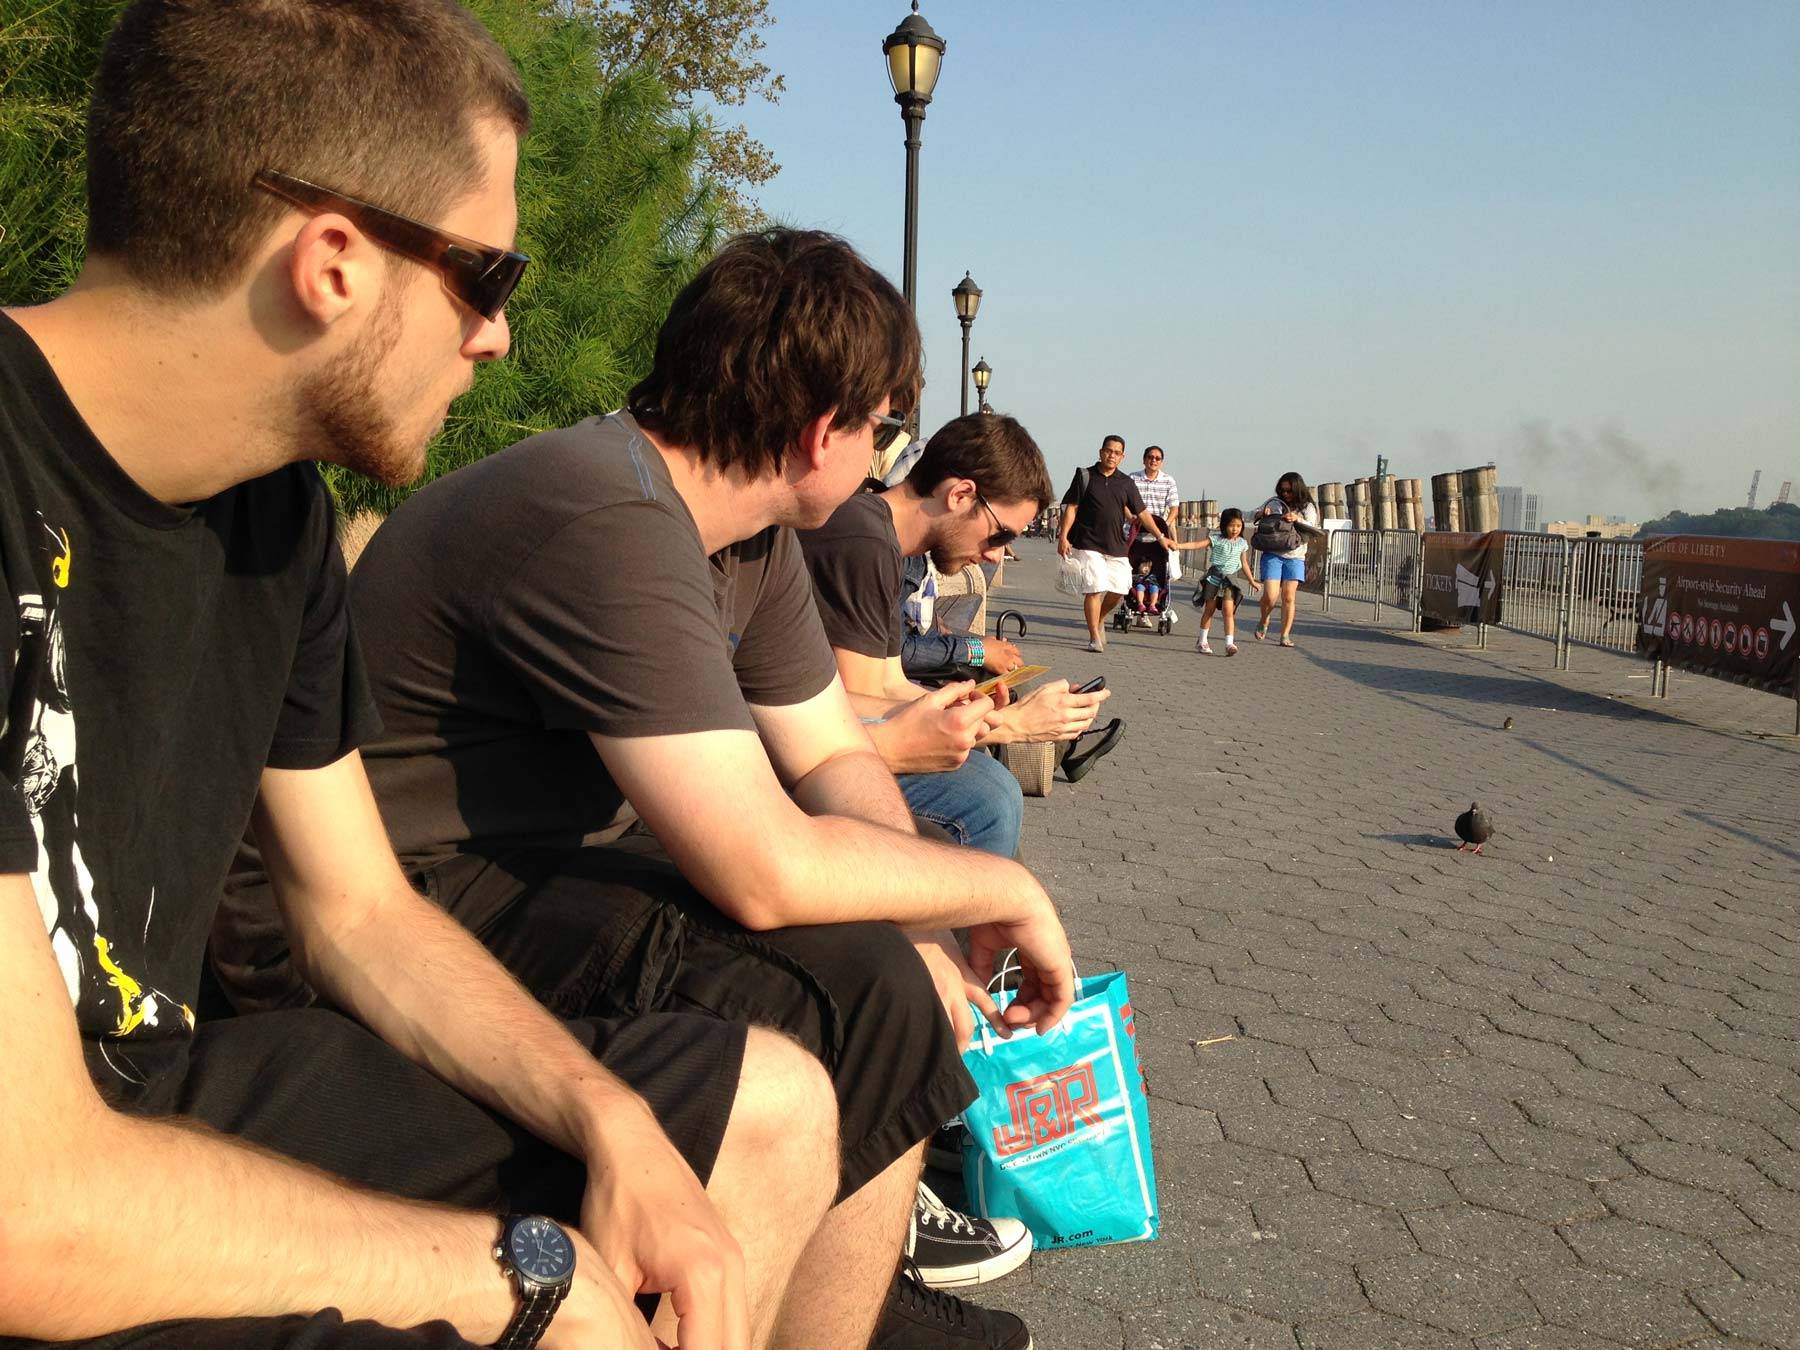 Irwin, Andrew, Butcher, and Jared sitting at the bay